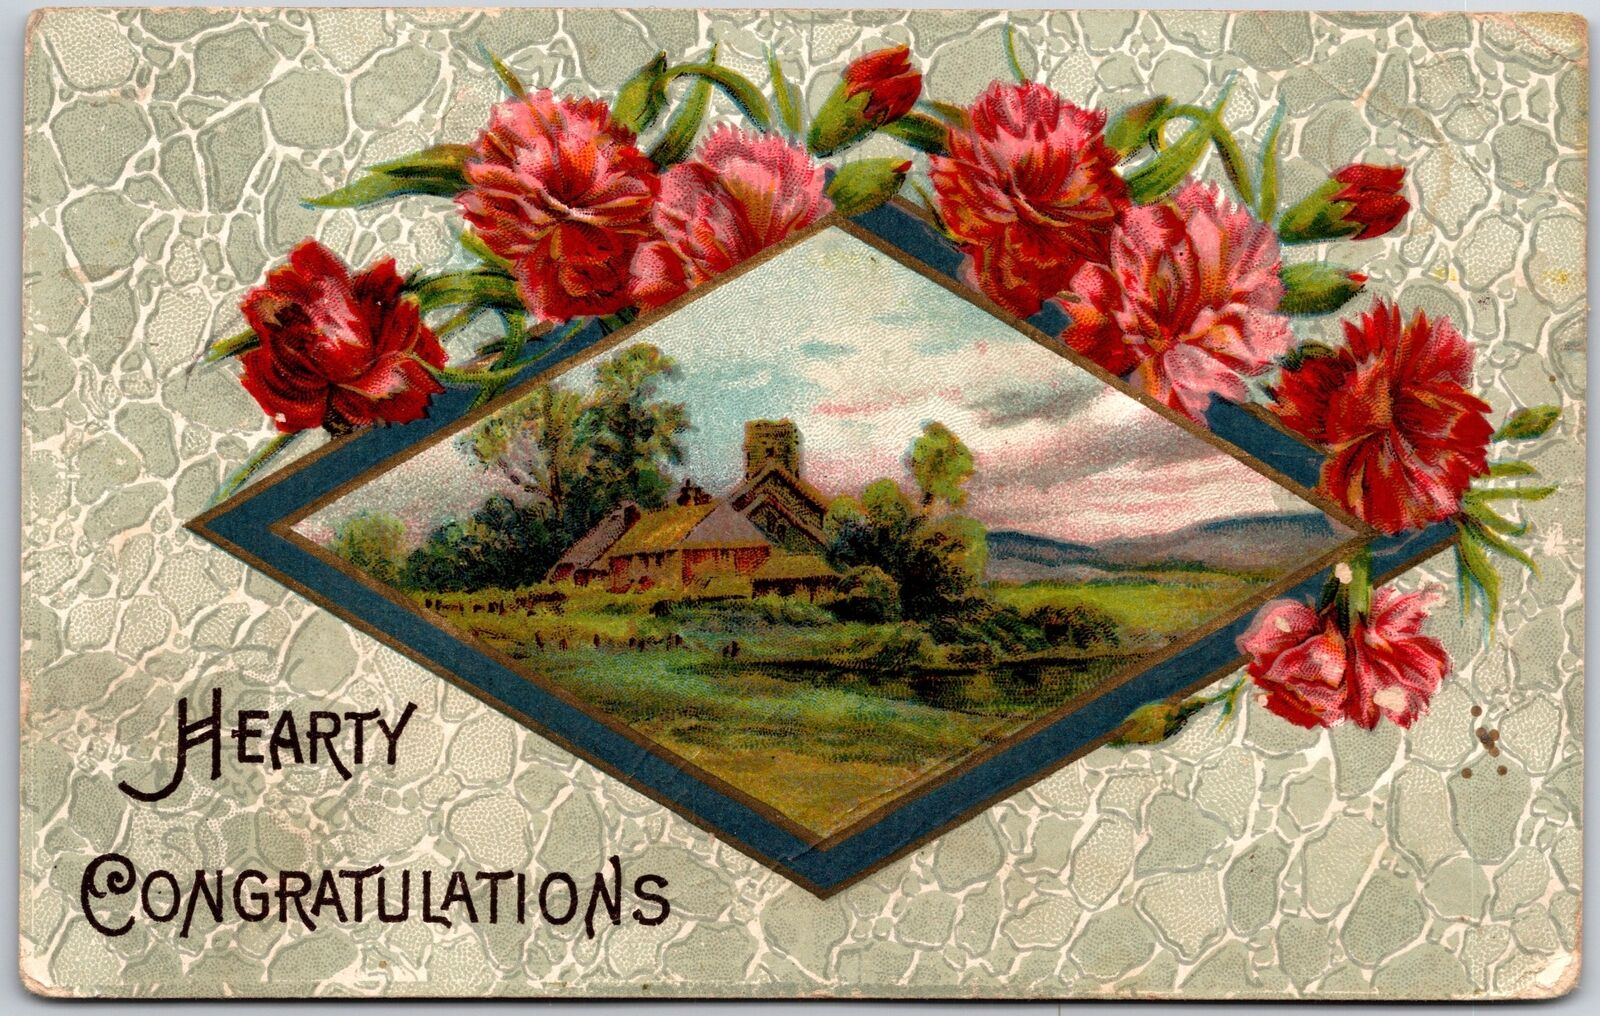 1913 Hearty Congratulations Red Flowers Home Landscape Greetings Posted Postcard